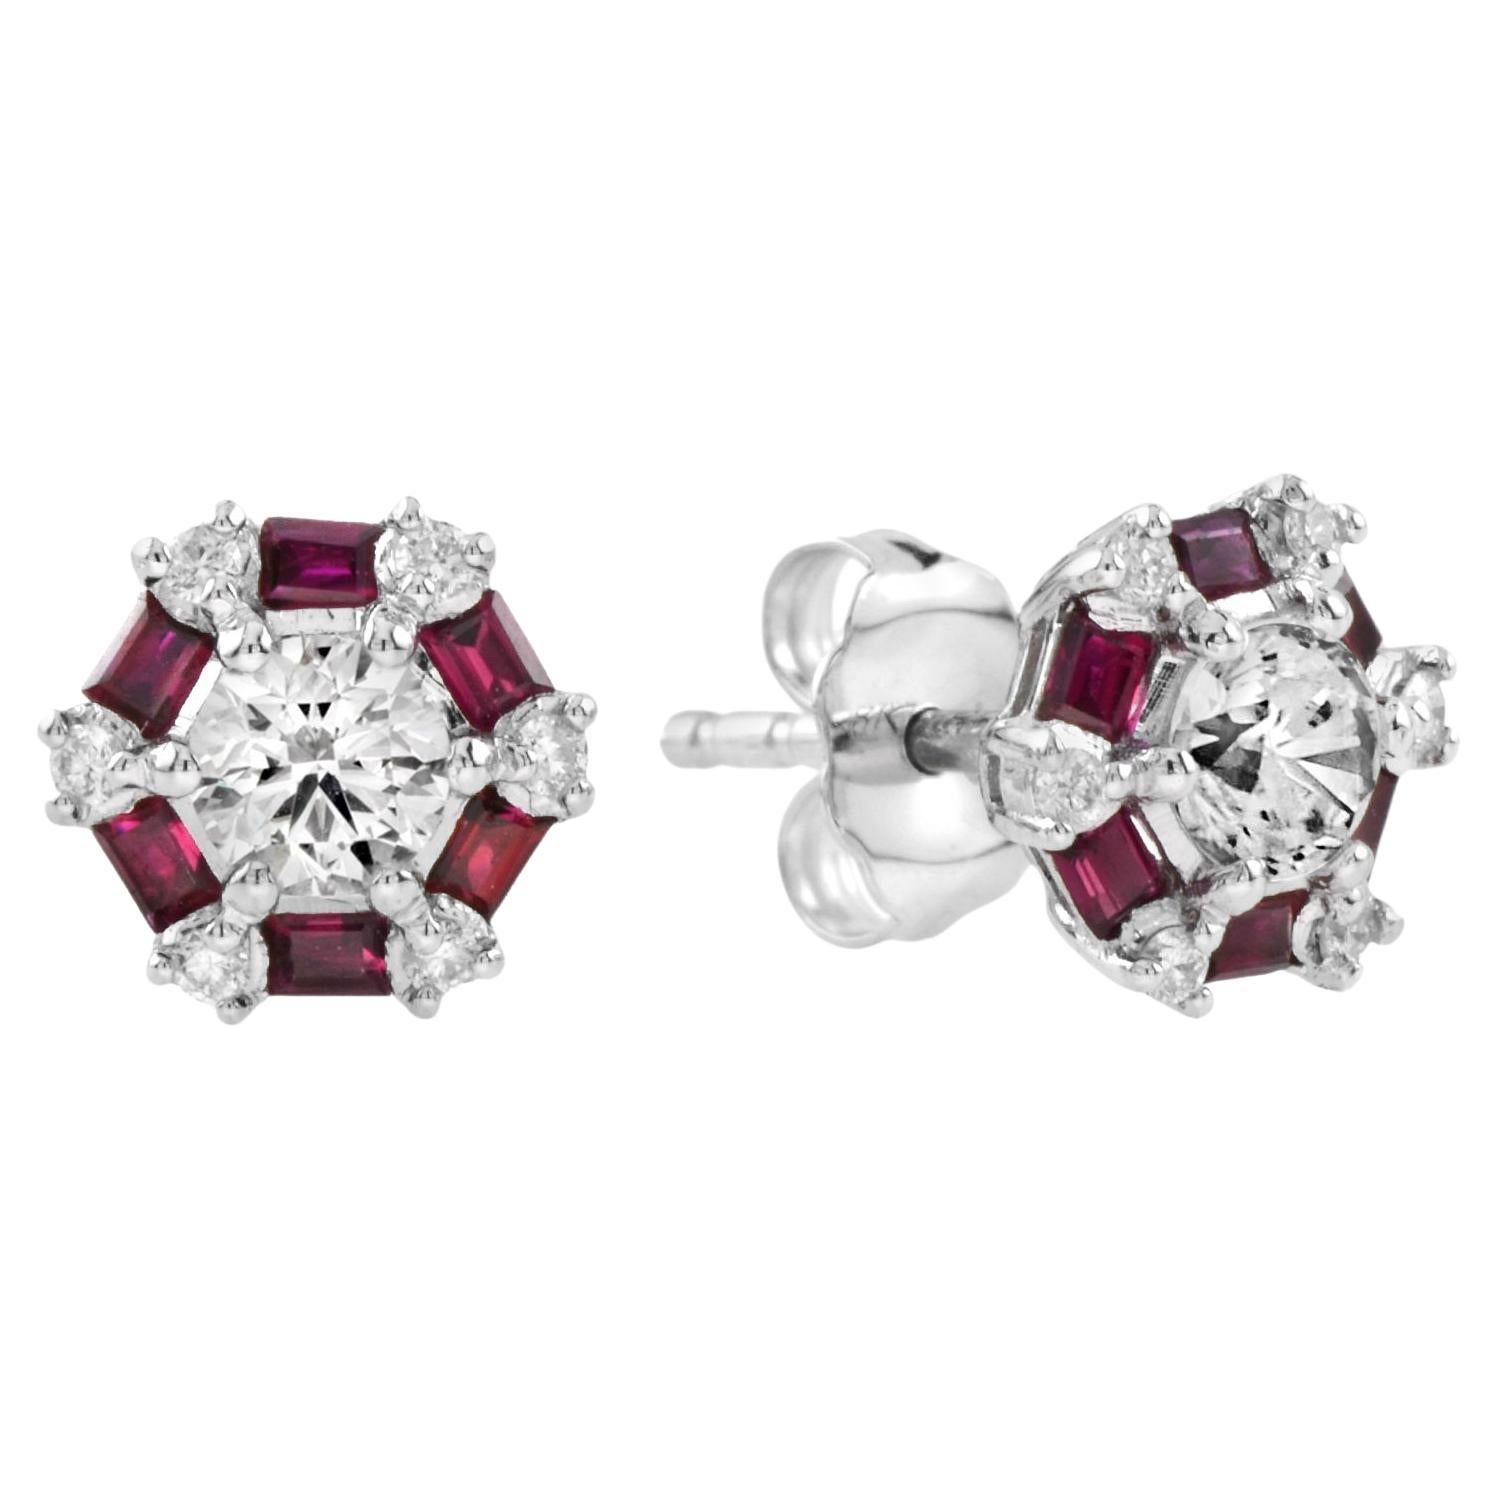 Round Cut Diamond and Ruby Cluster Earrings in 14K White Gold